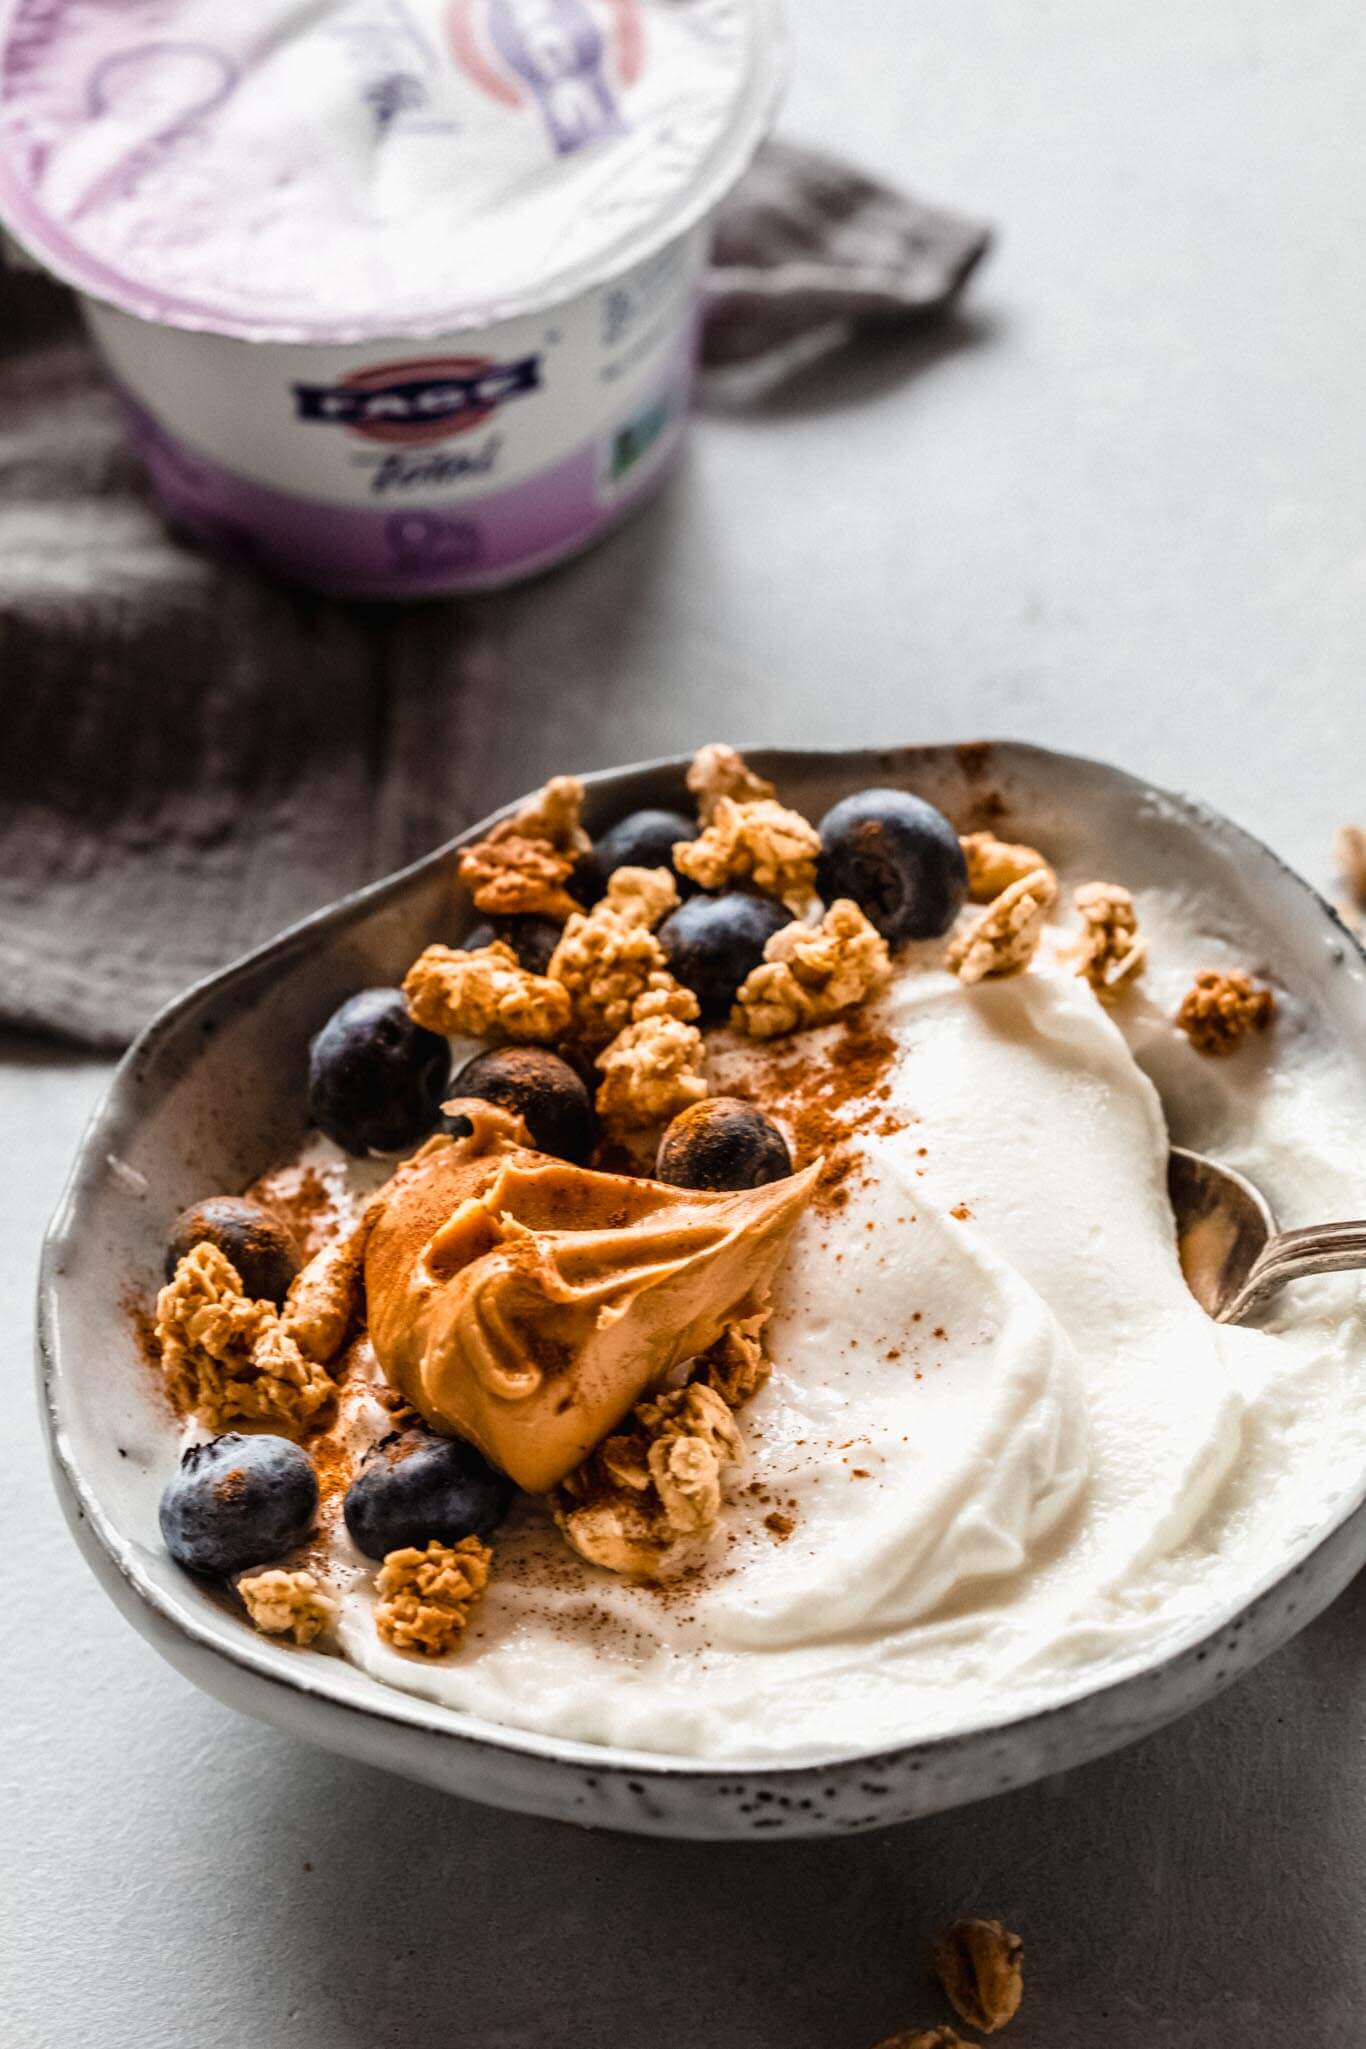 Yogurt topped with peanut butter, blueberries & granola.